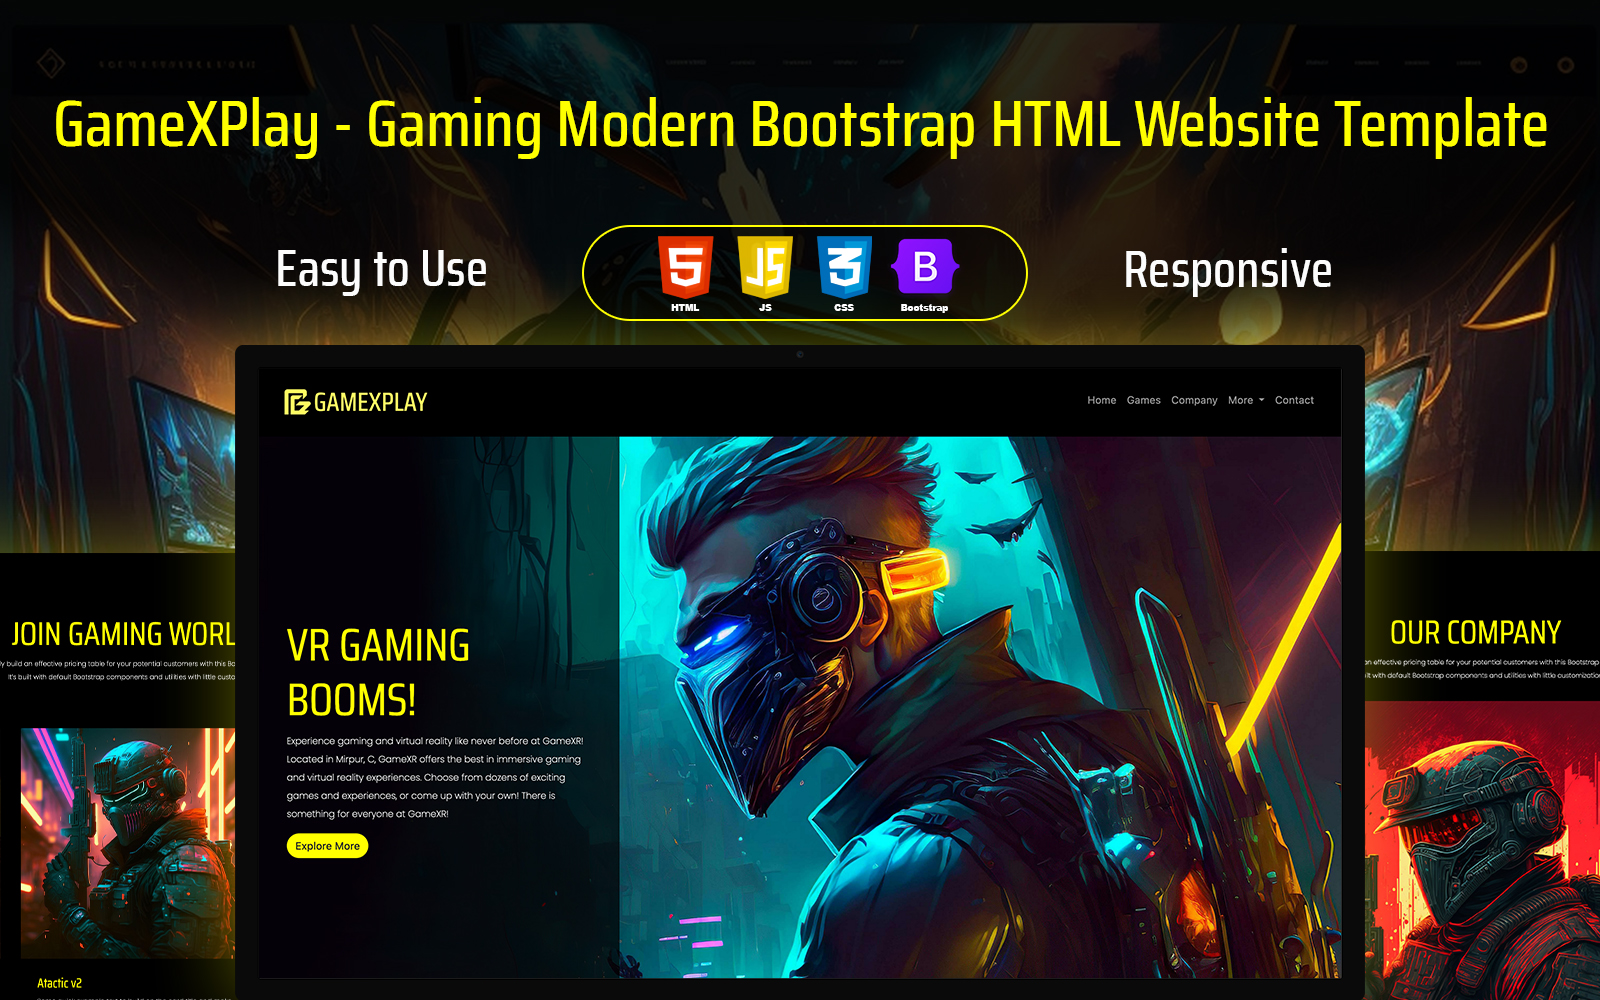 GameXPlay – Gaming Modern Bootstrap HTML Website Template